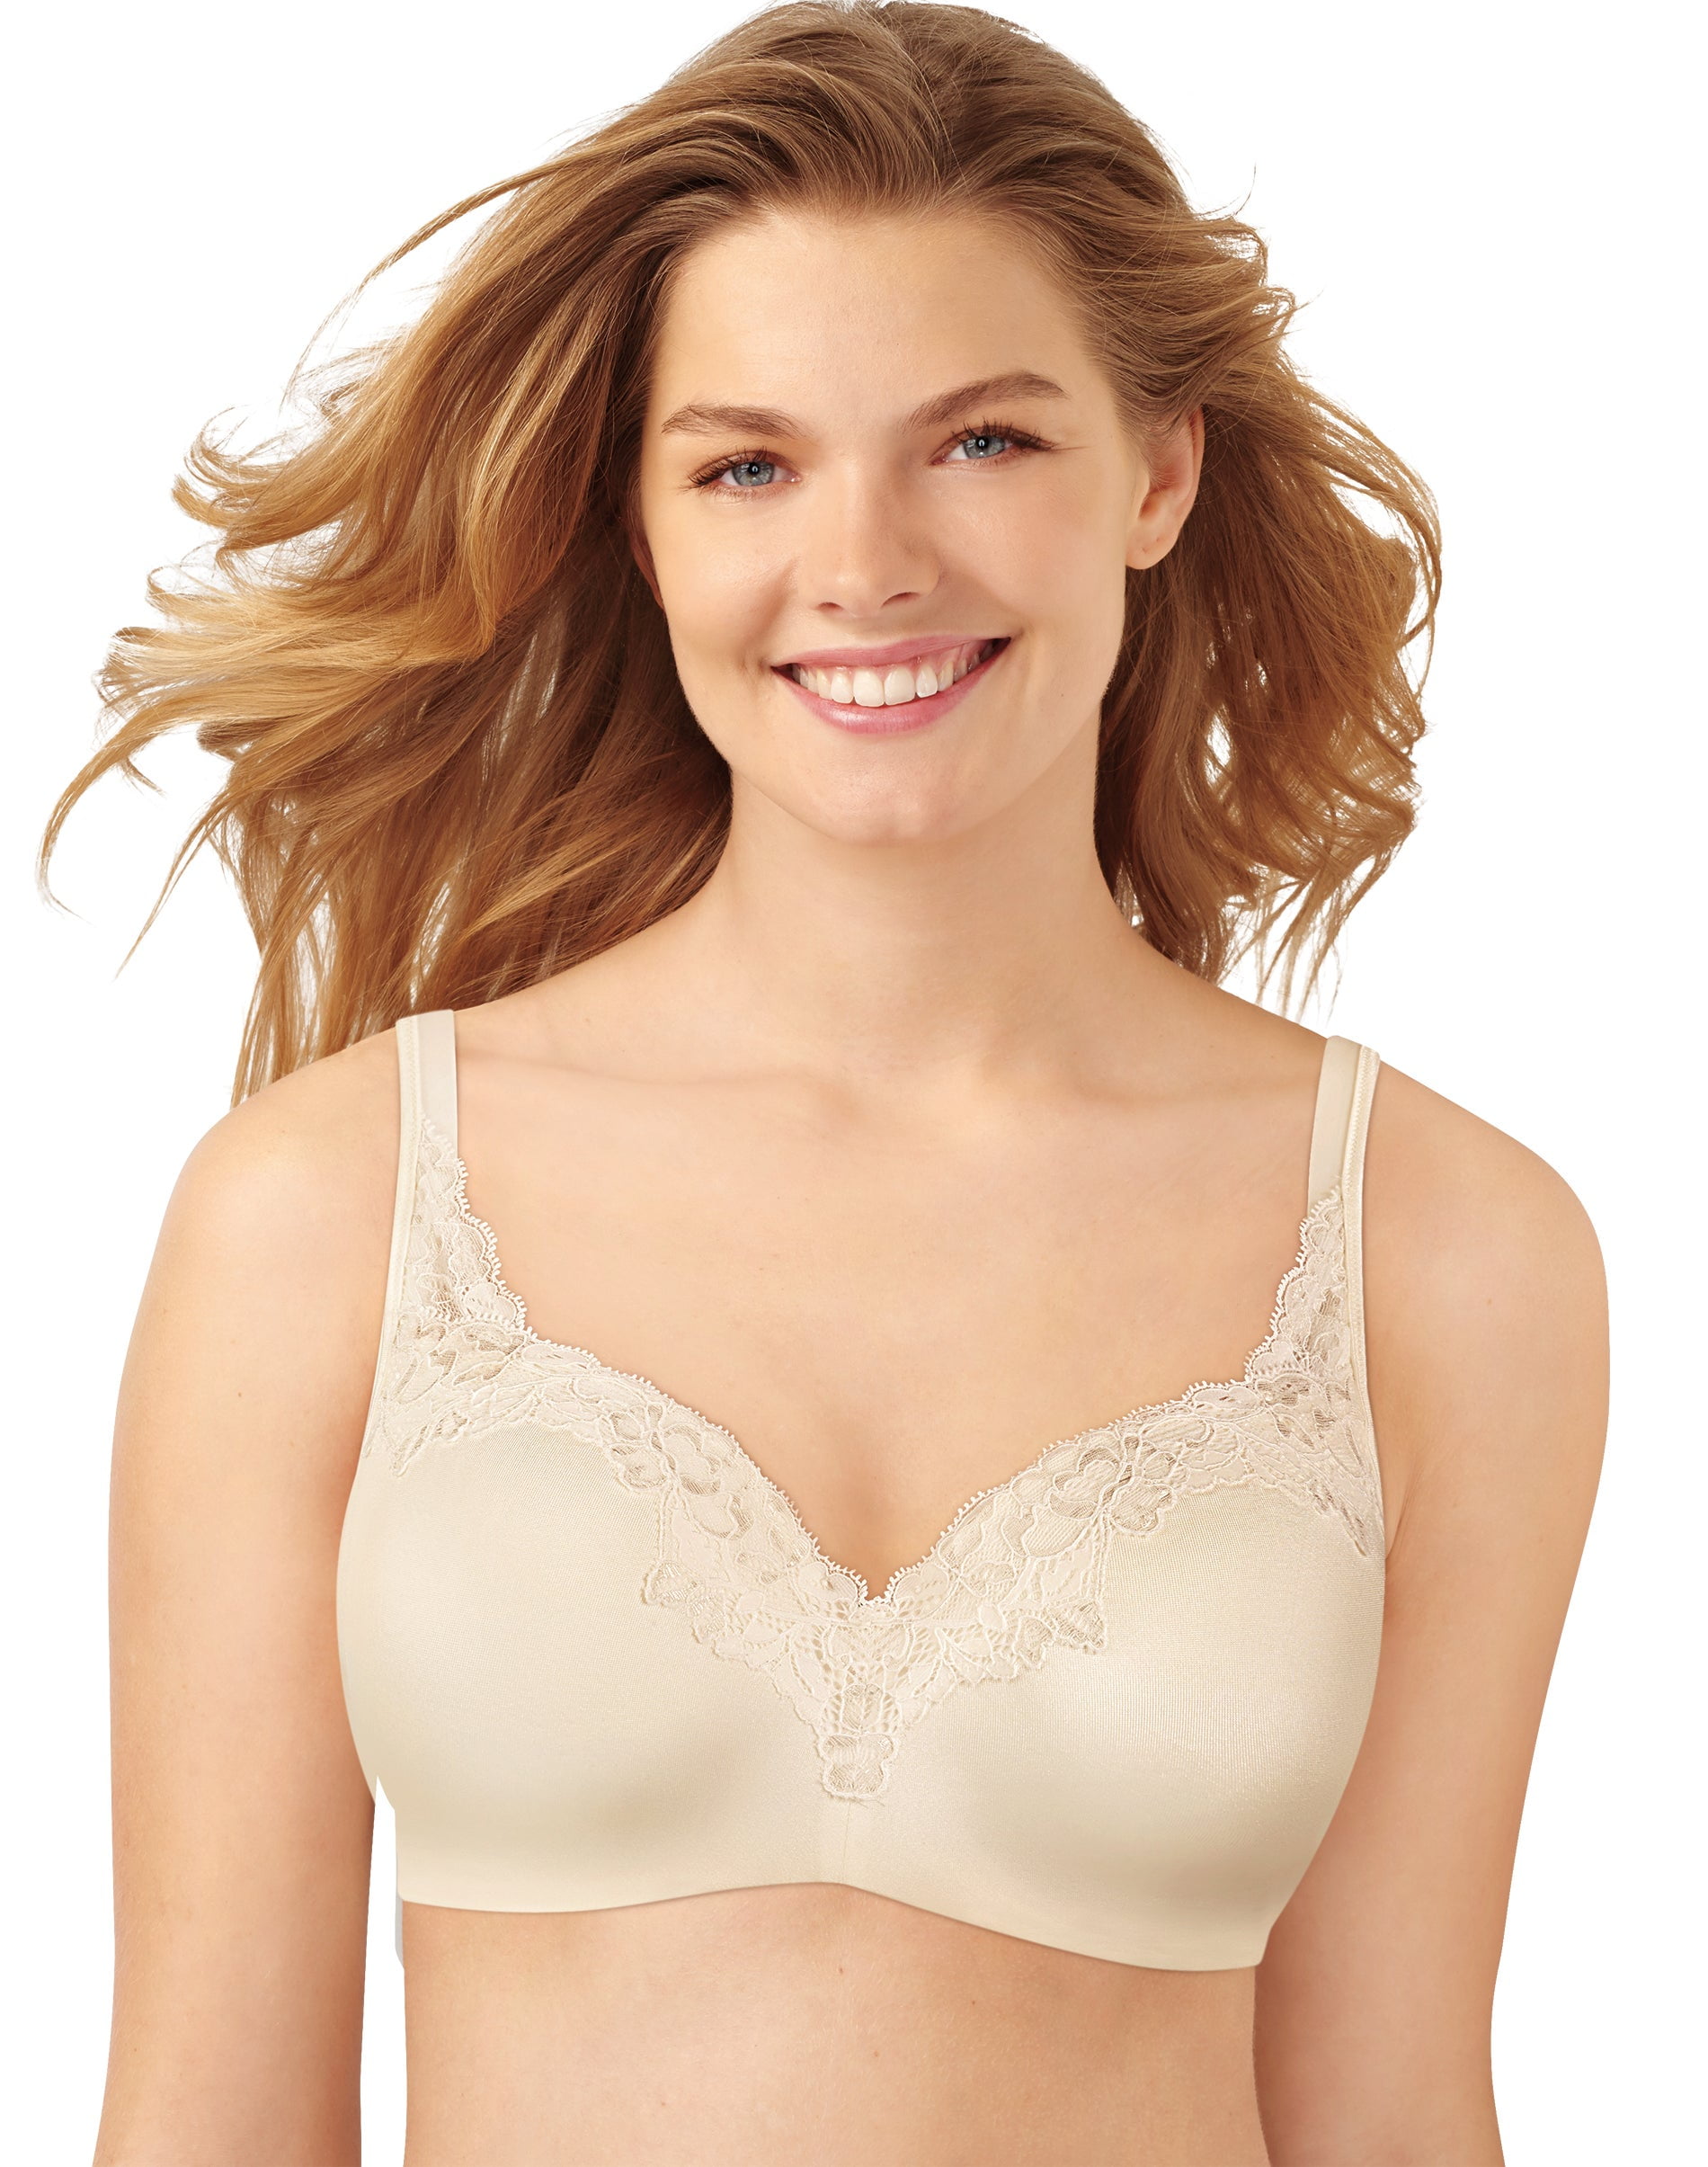 Playtex Women's Secrets Shapes & Supports Balconette - Import It All